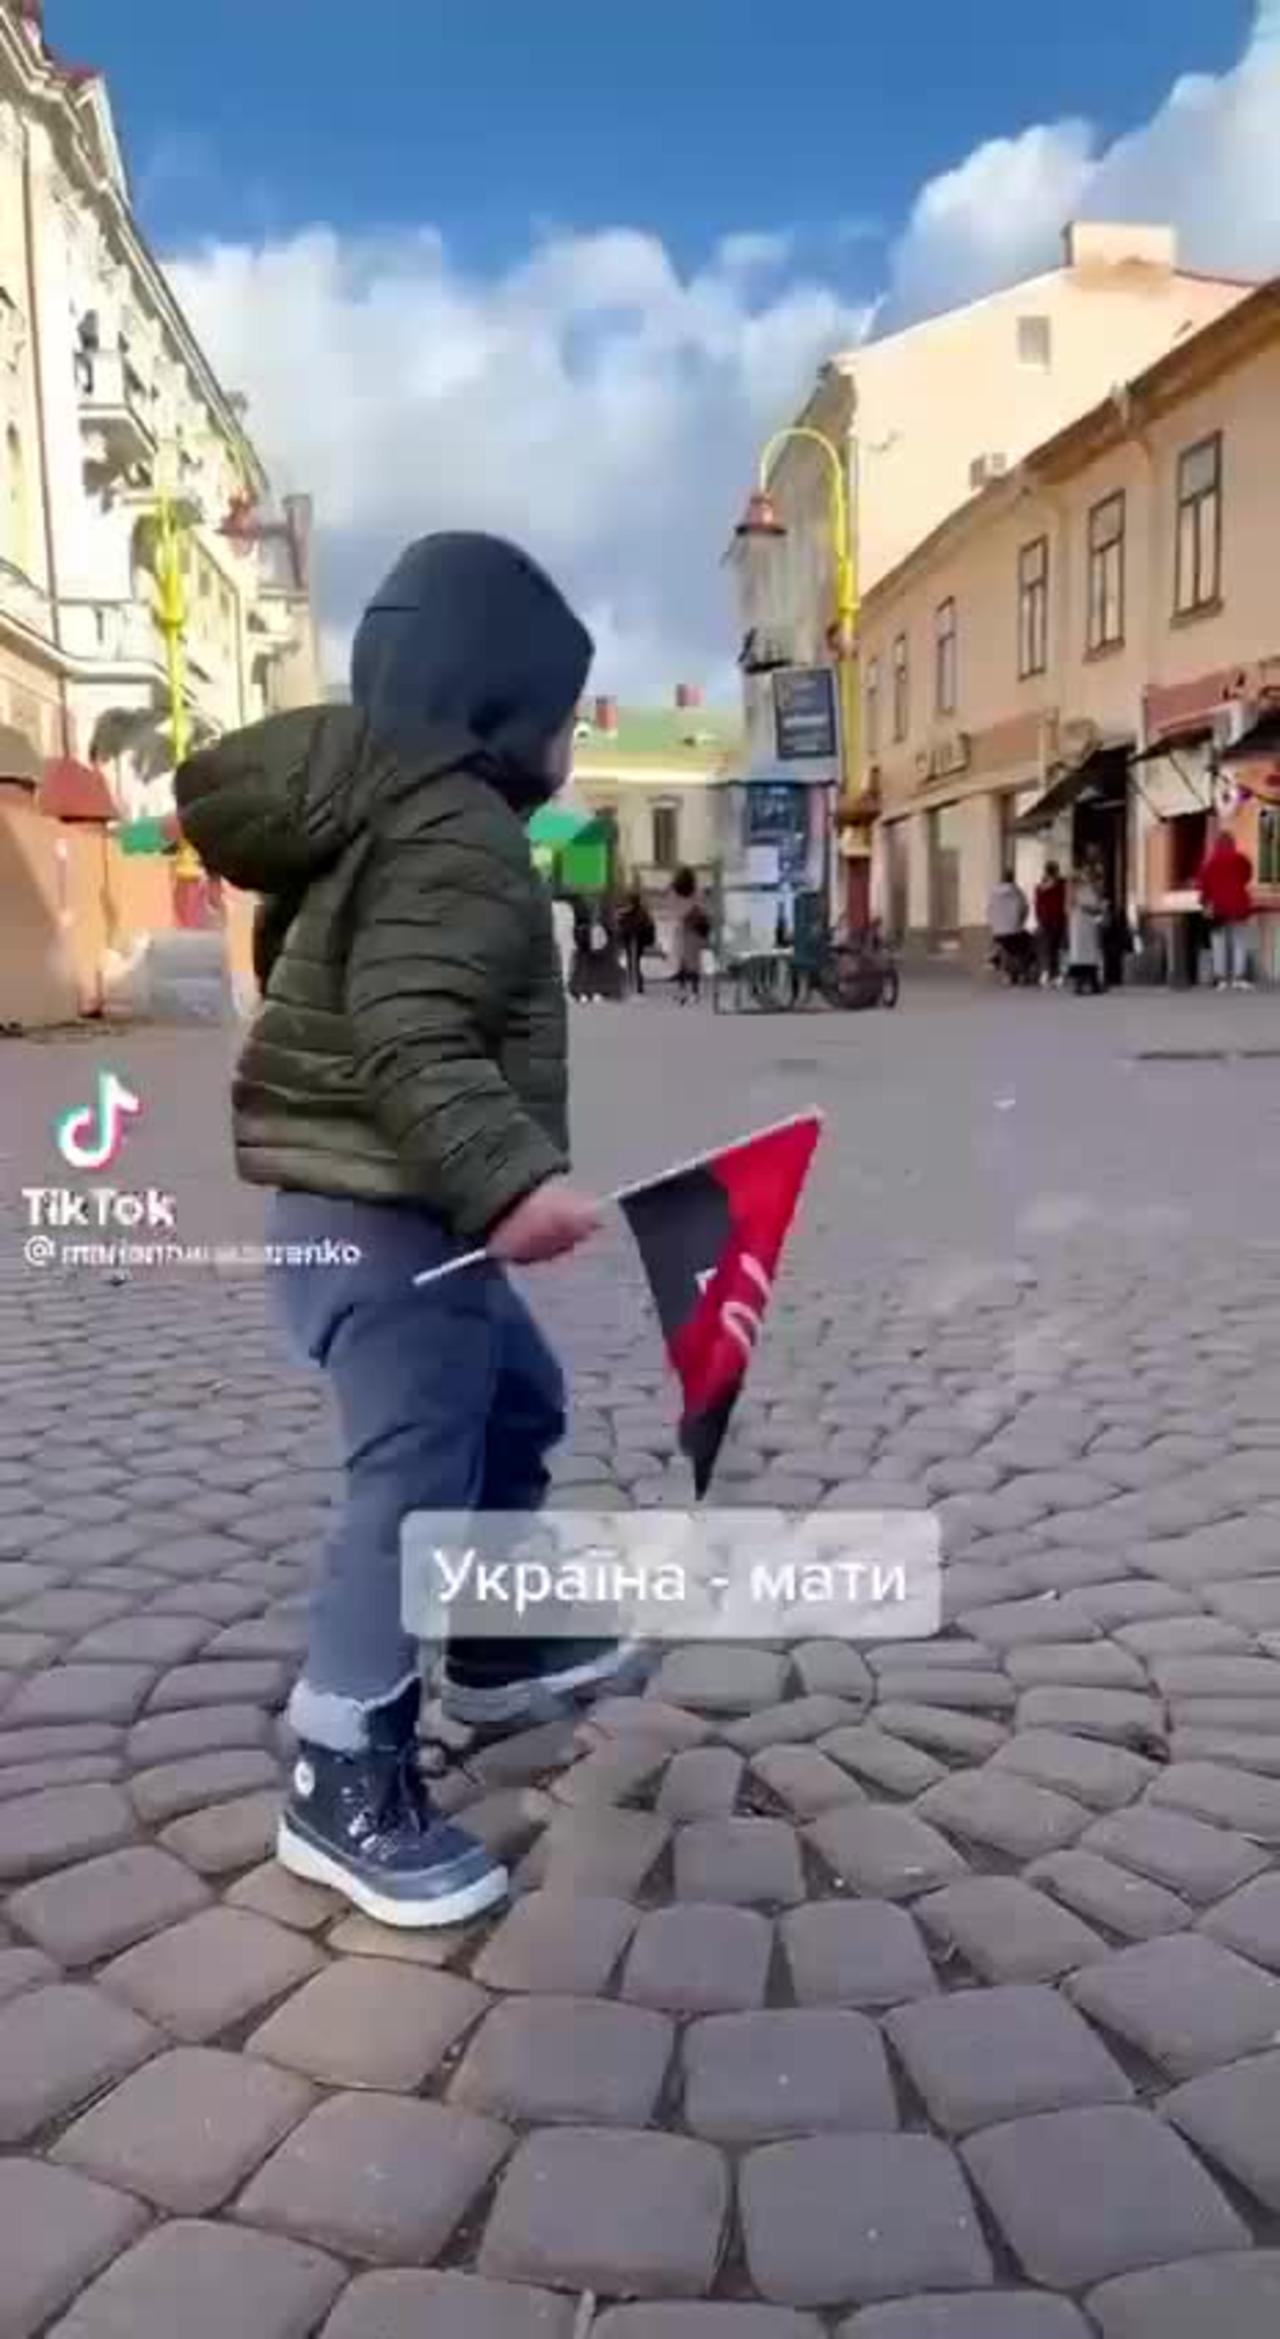 Ukrainian child singing a song to the memory of Nazi